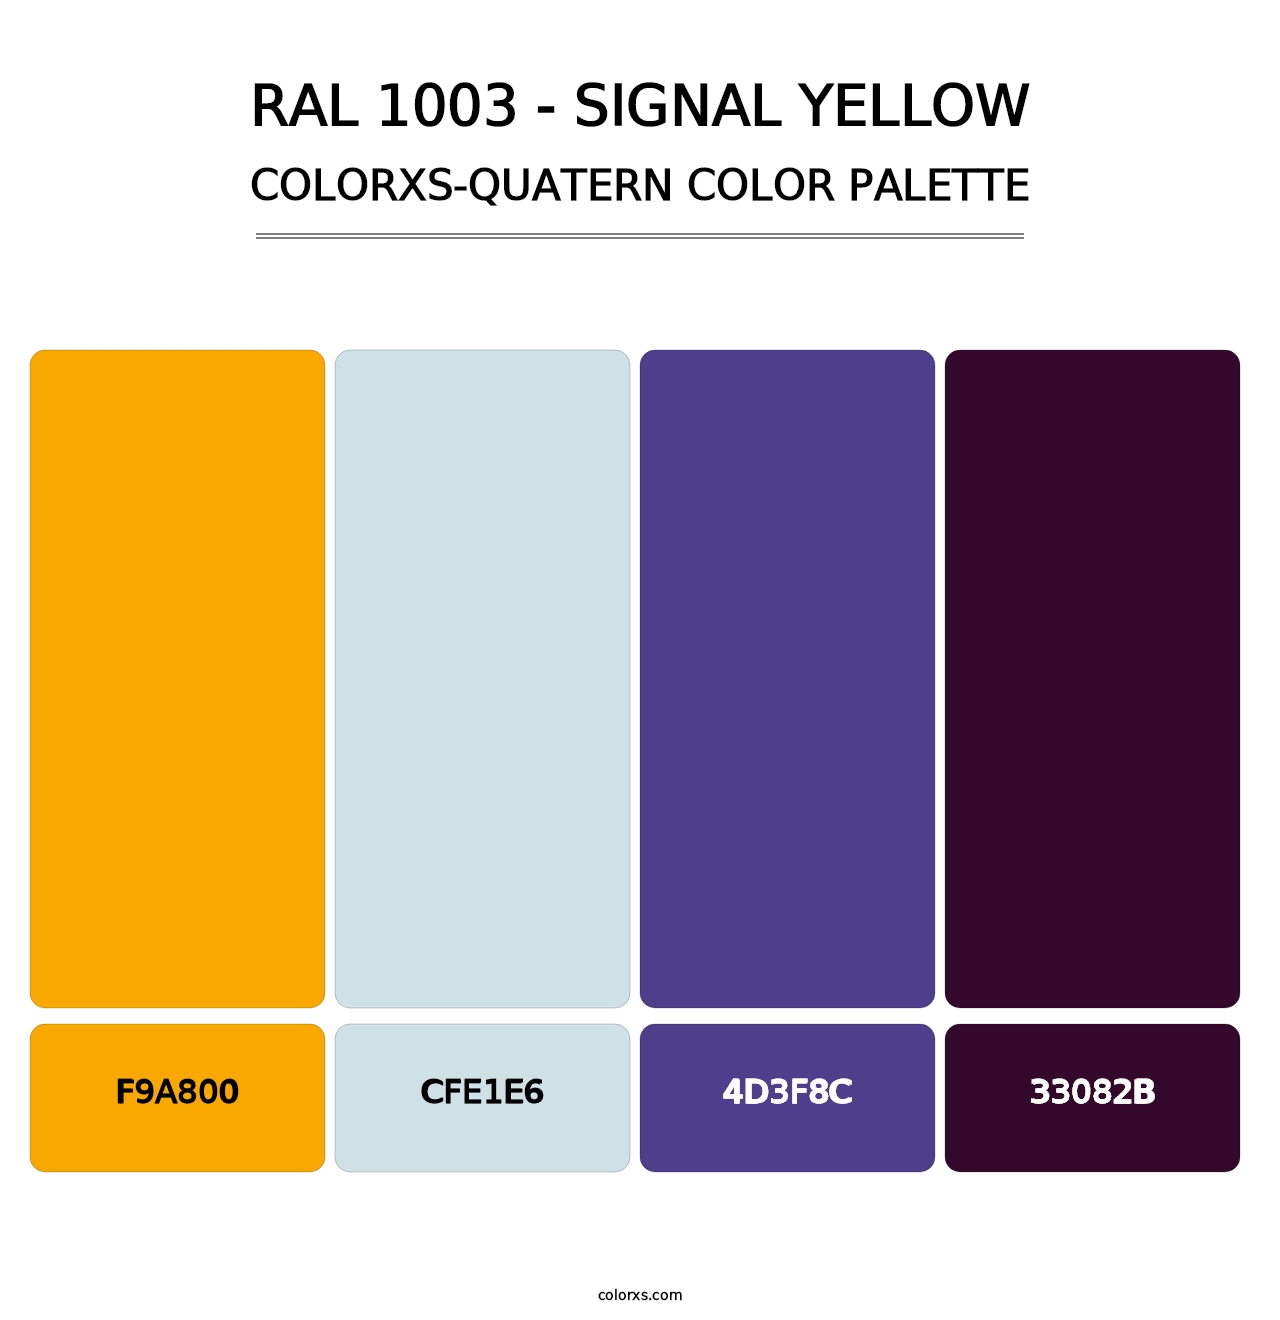 RAL 1003 - Signal Yellow - Colorxs Quatern Palette